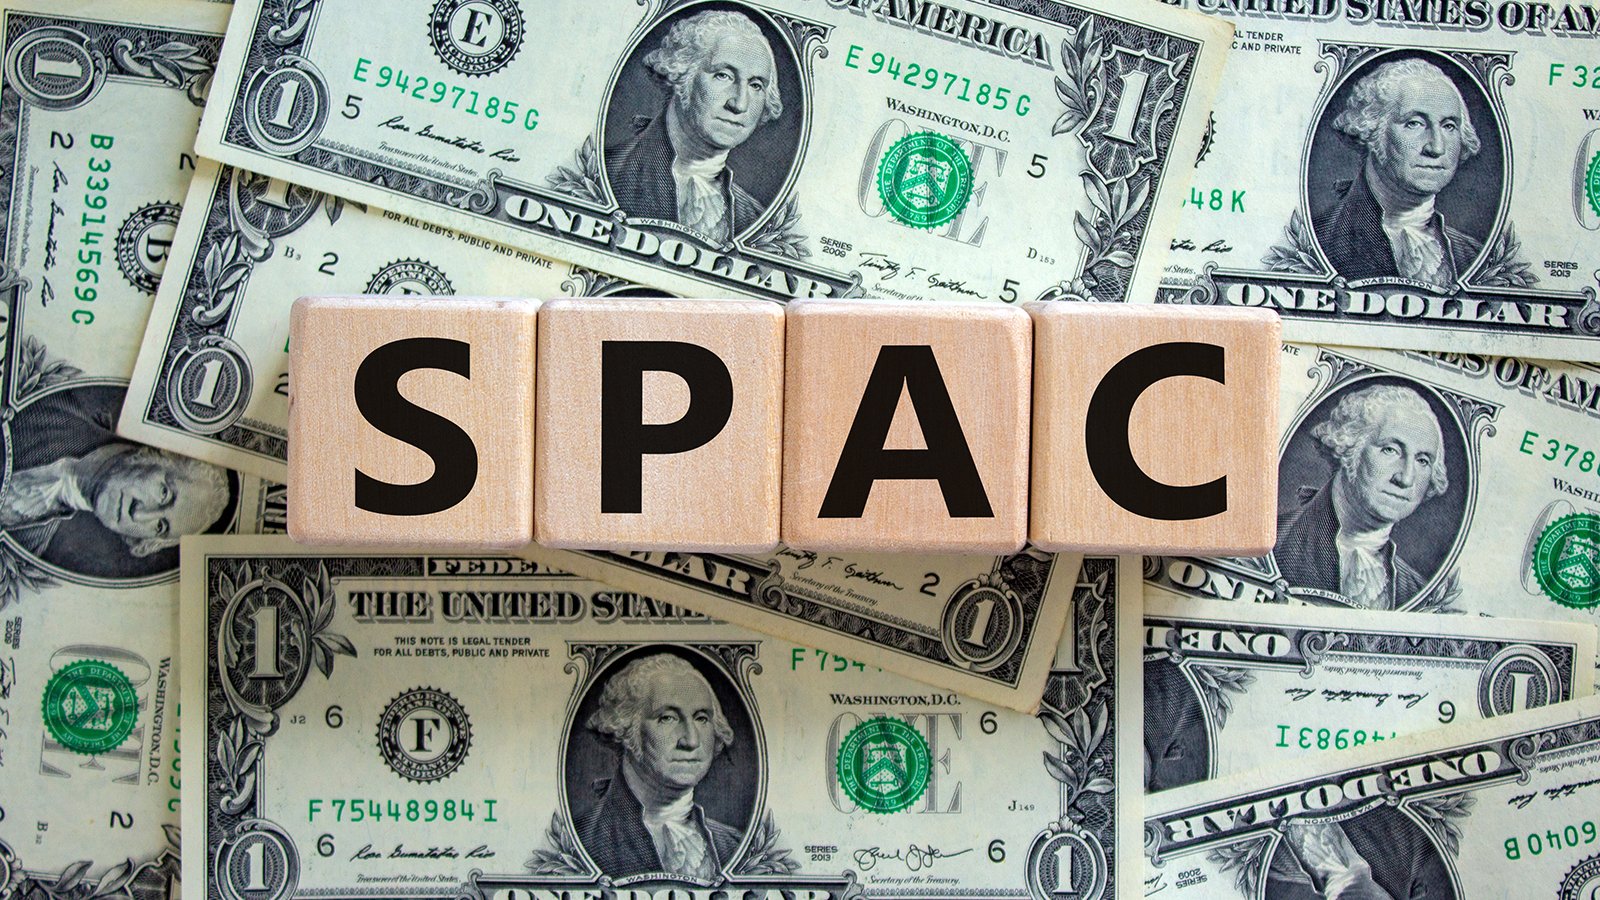 GSRM stock: An image of wooden blocks that say SPAC over a series of one dollar bills.